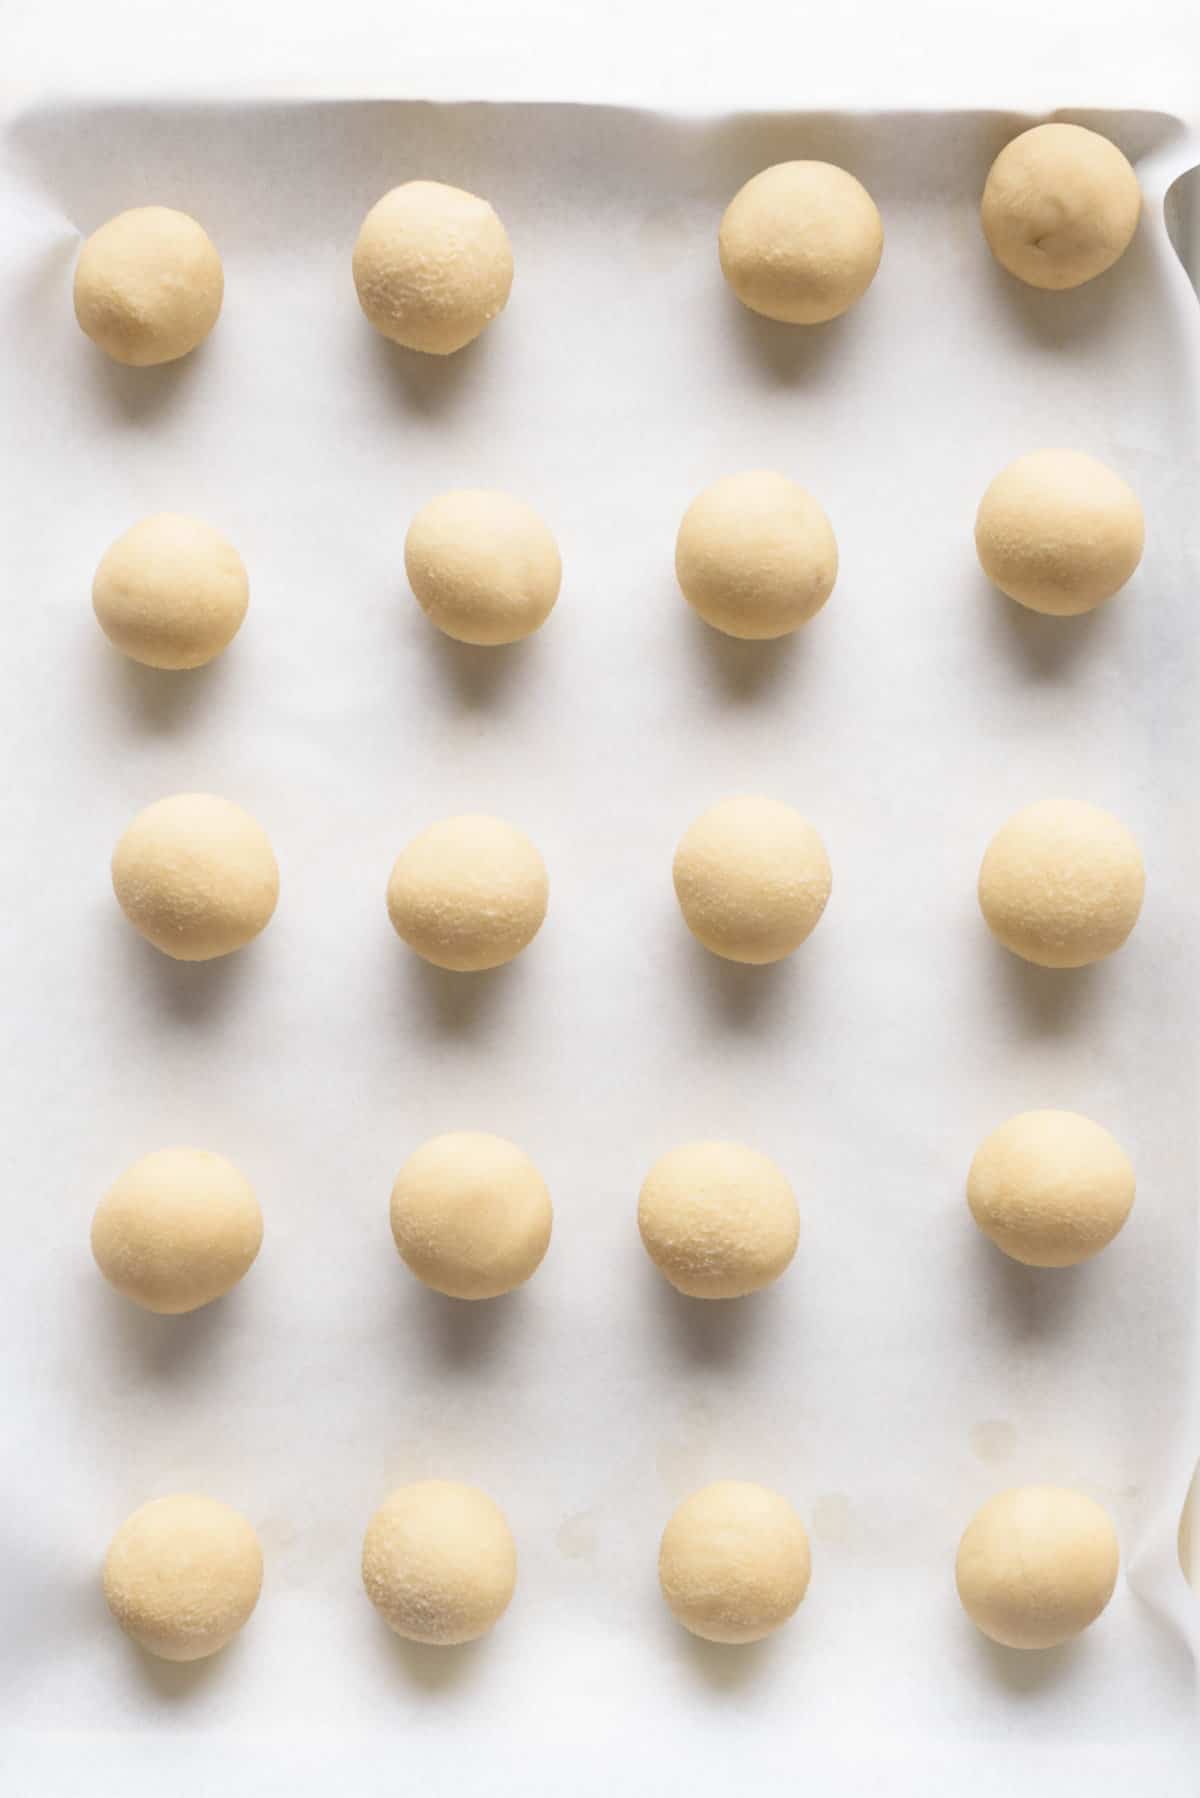 Overhead view of cookie dough balls on baking sheet.